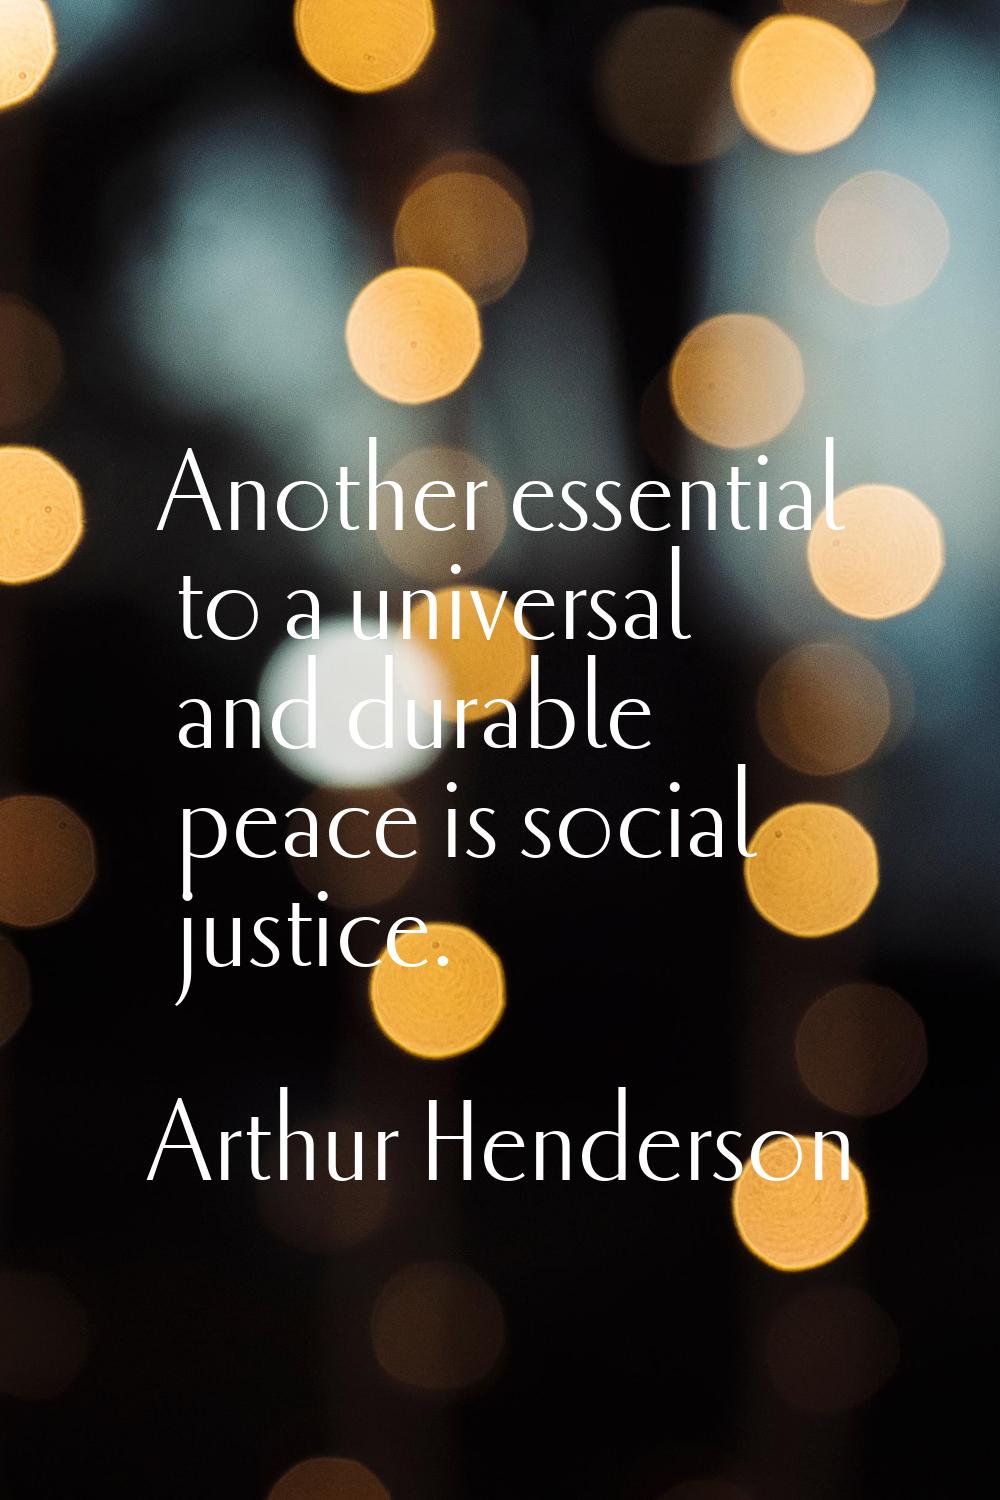 Another essential to a universal and durable peace is social justice.